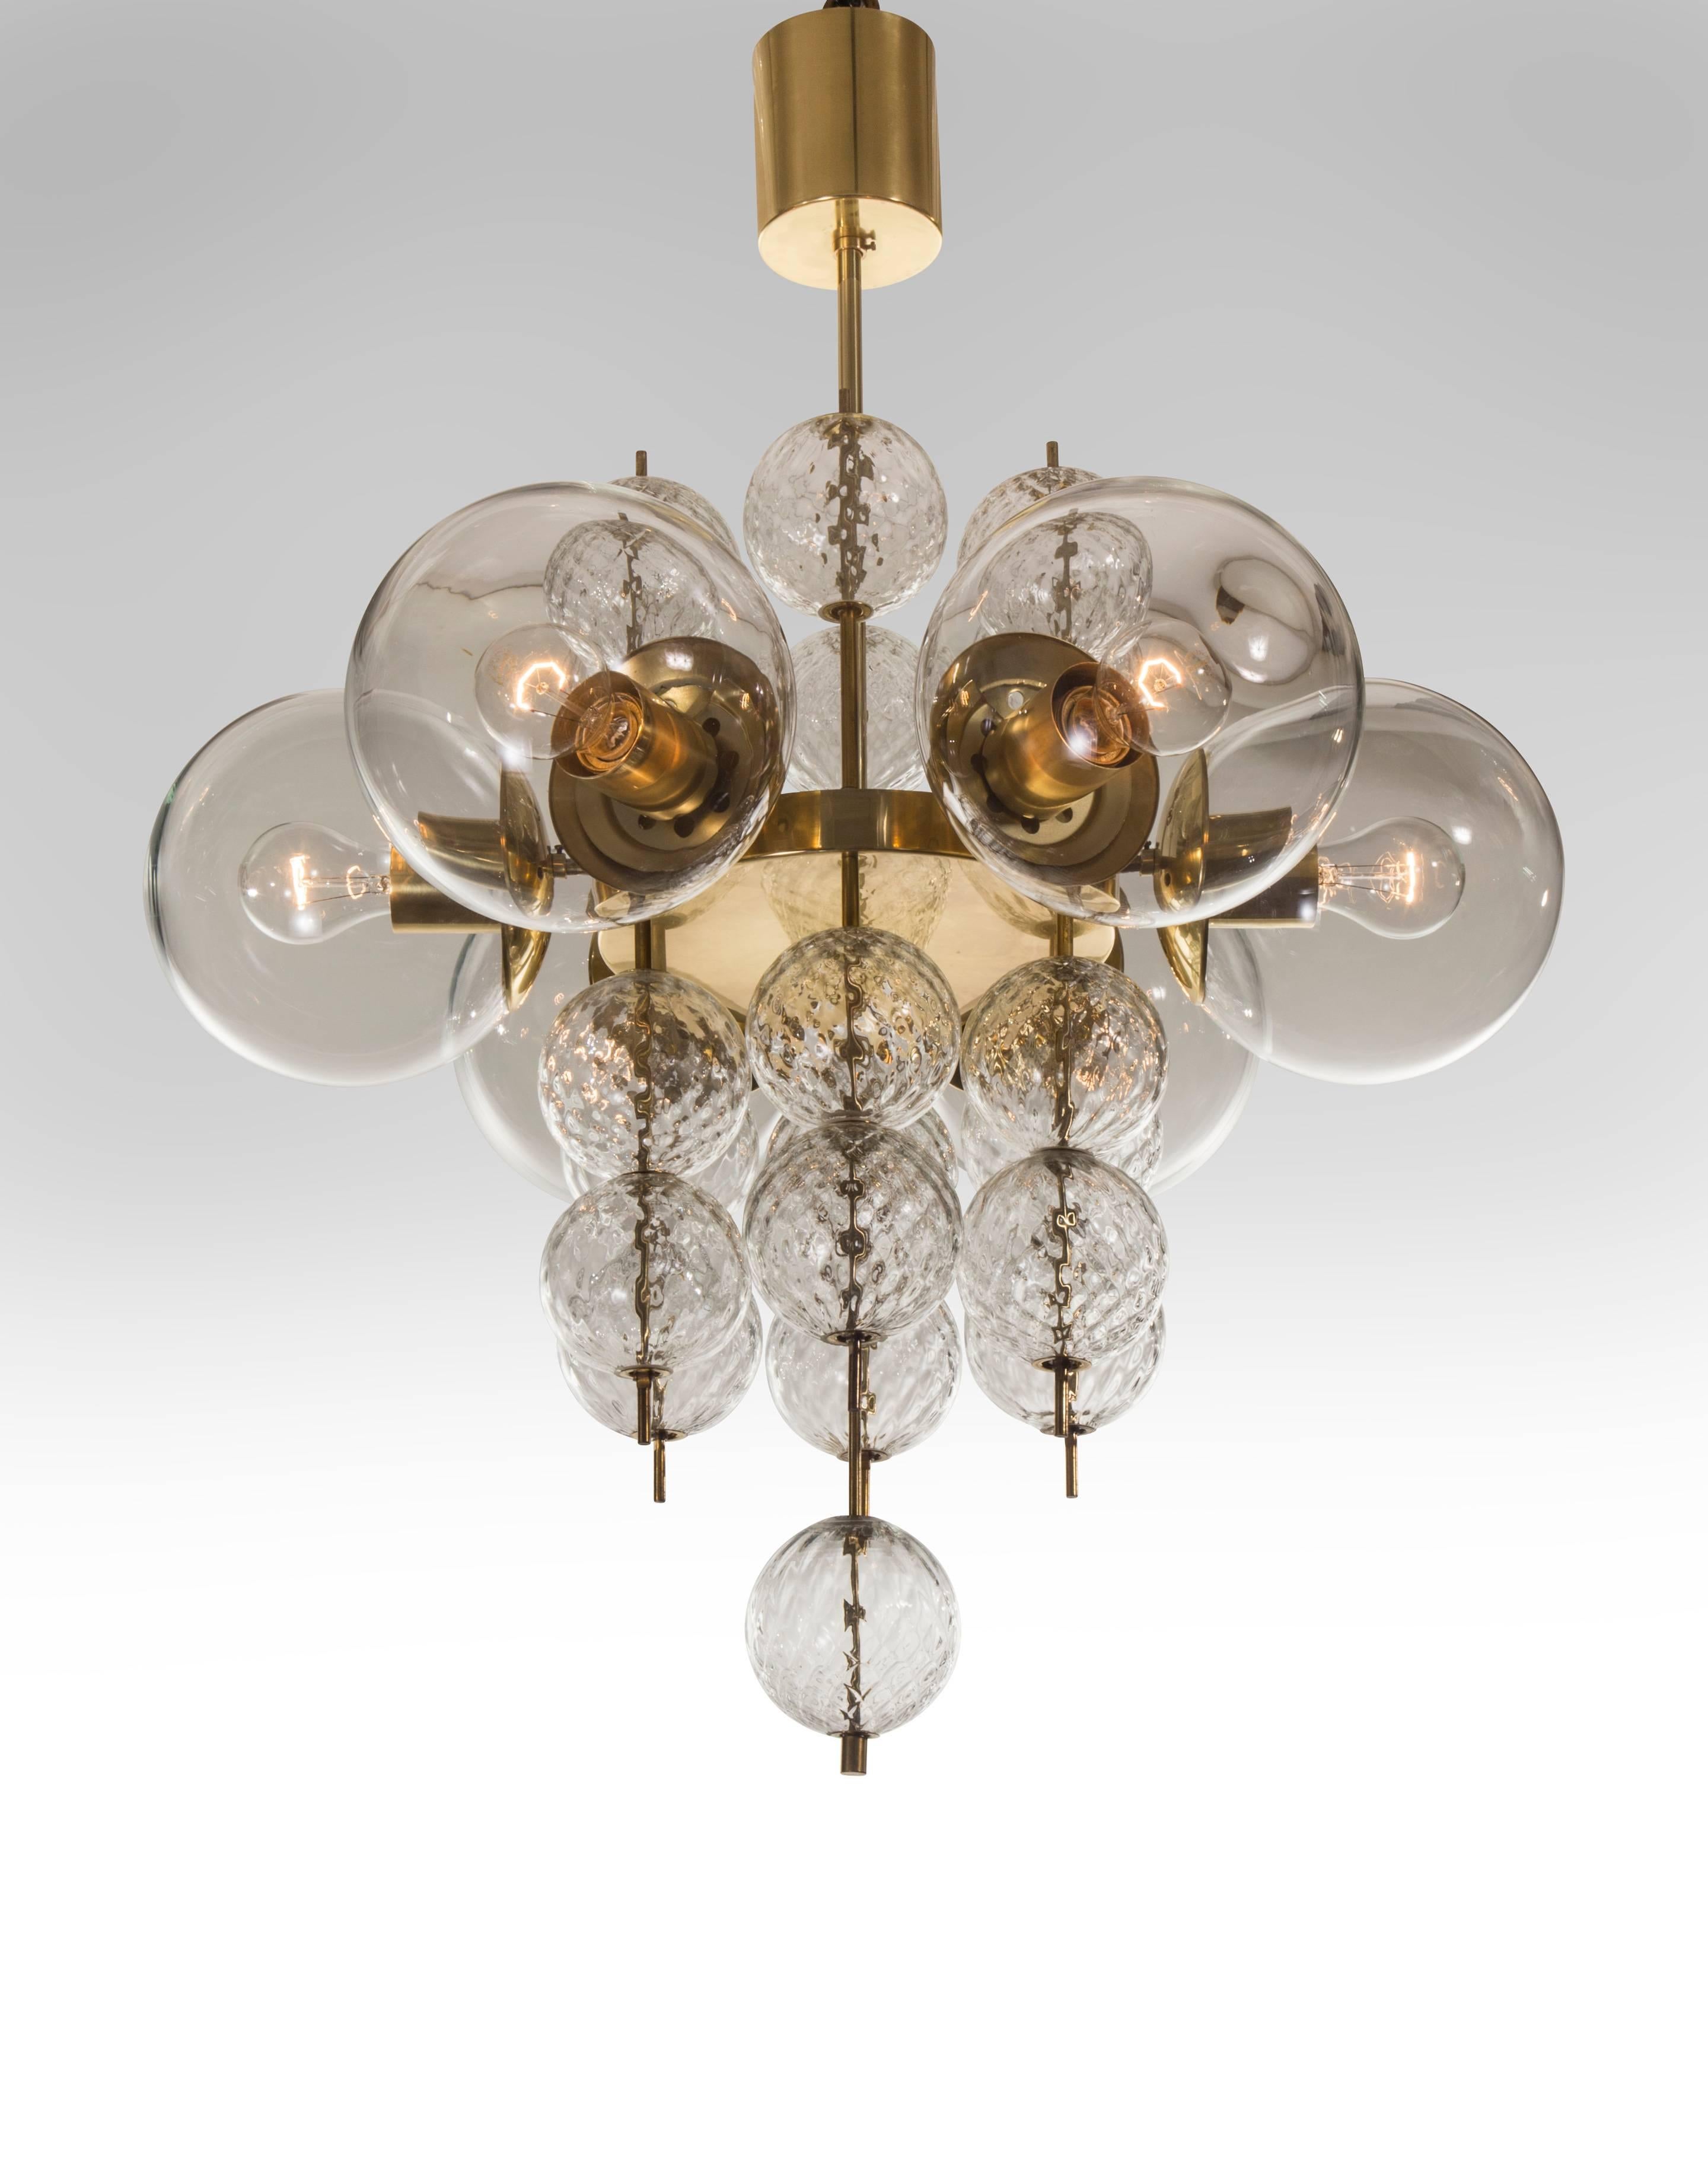 A spirited and chic design complete with all the original elements. Each cylindrical canopy, above a circular brass body issuing six lights enclosed by glass globes and adorned by quilted glass spheres floating on rods.

The height of the